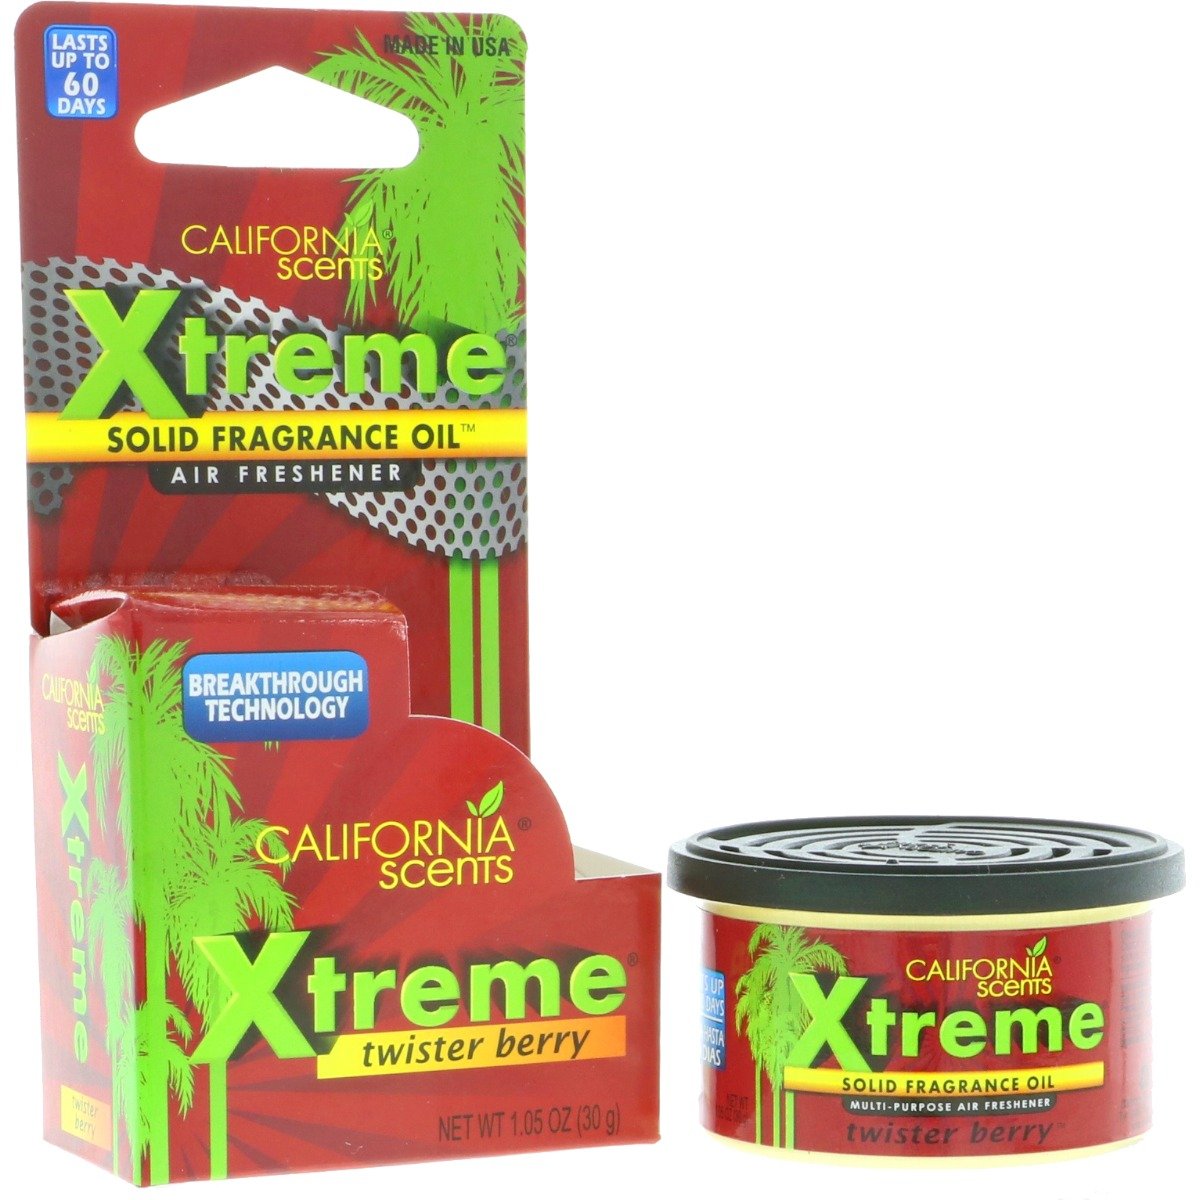 Xtreme Twister Berry